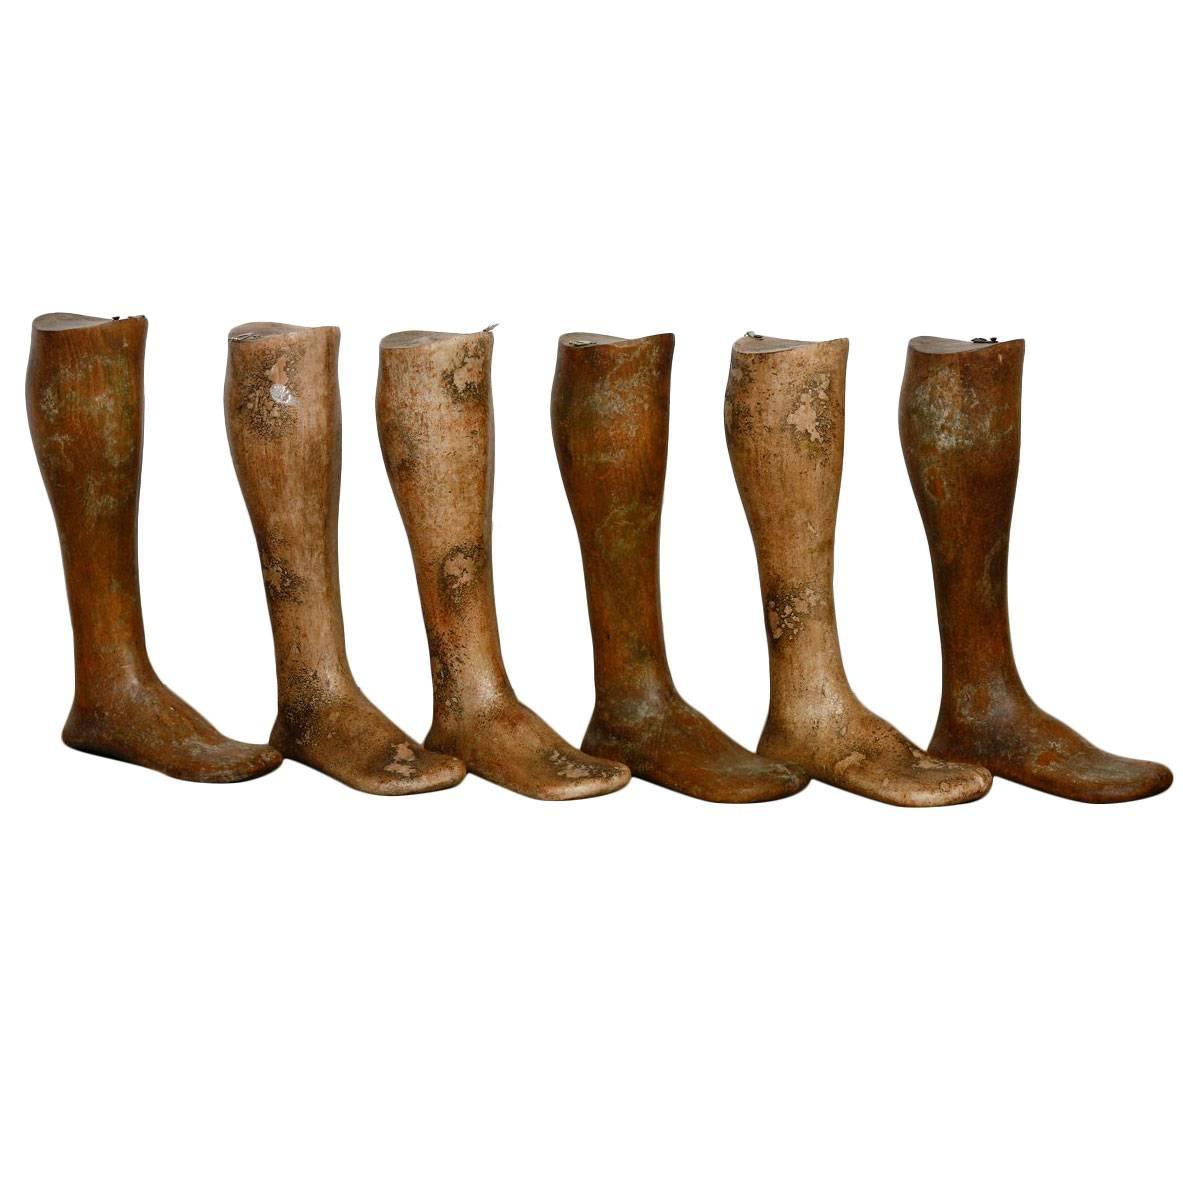 19th Century Wooden Riding Boot Molds or Forms